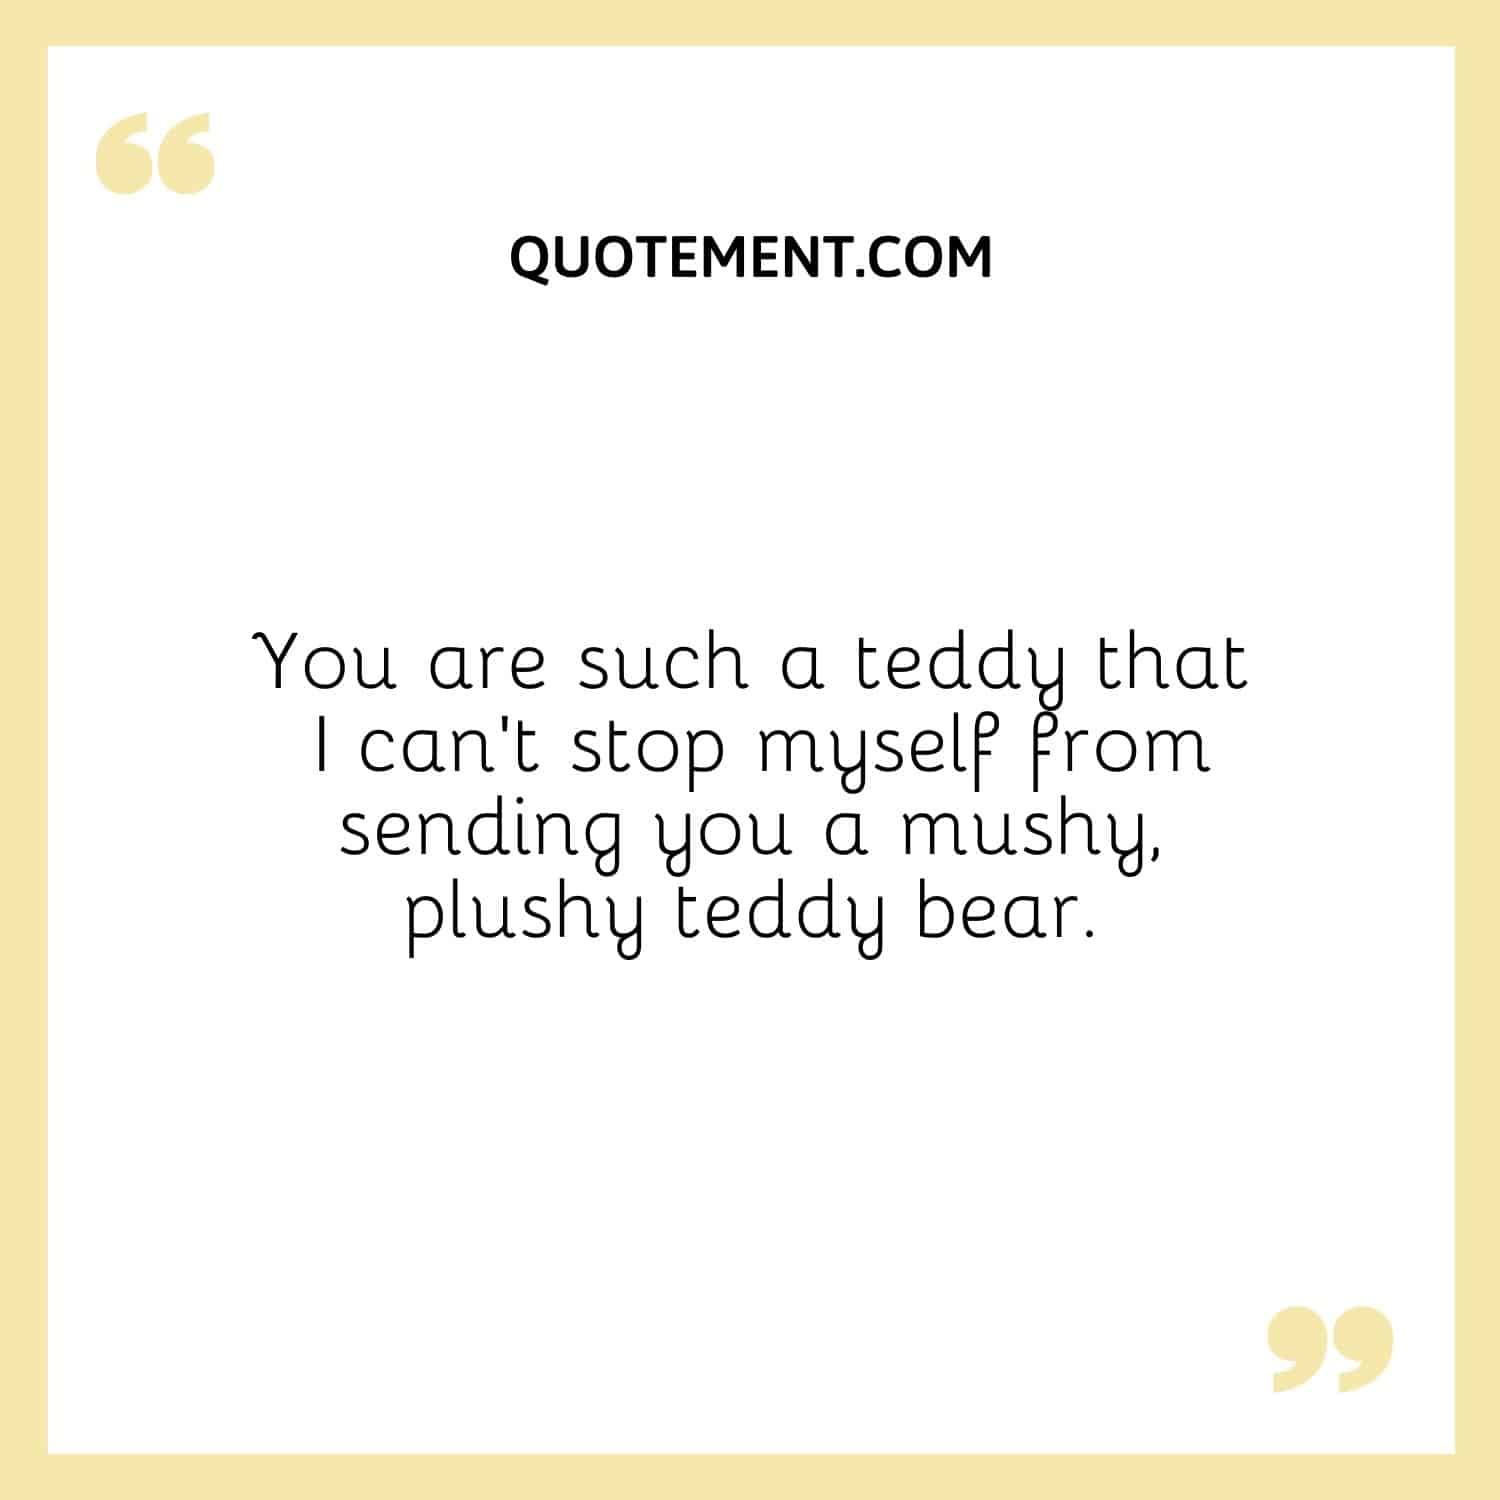 You are such a teddy